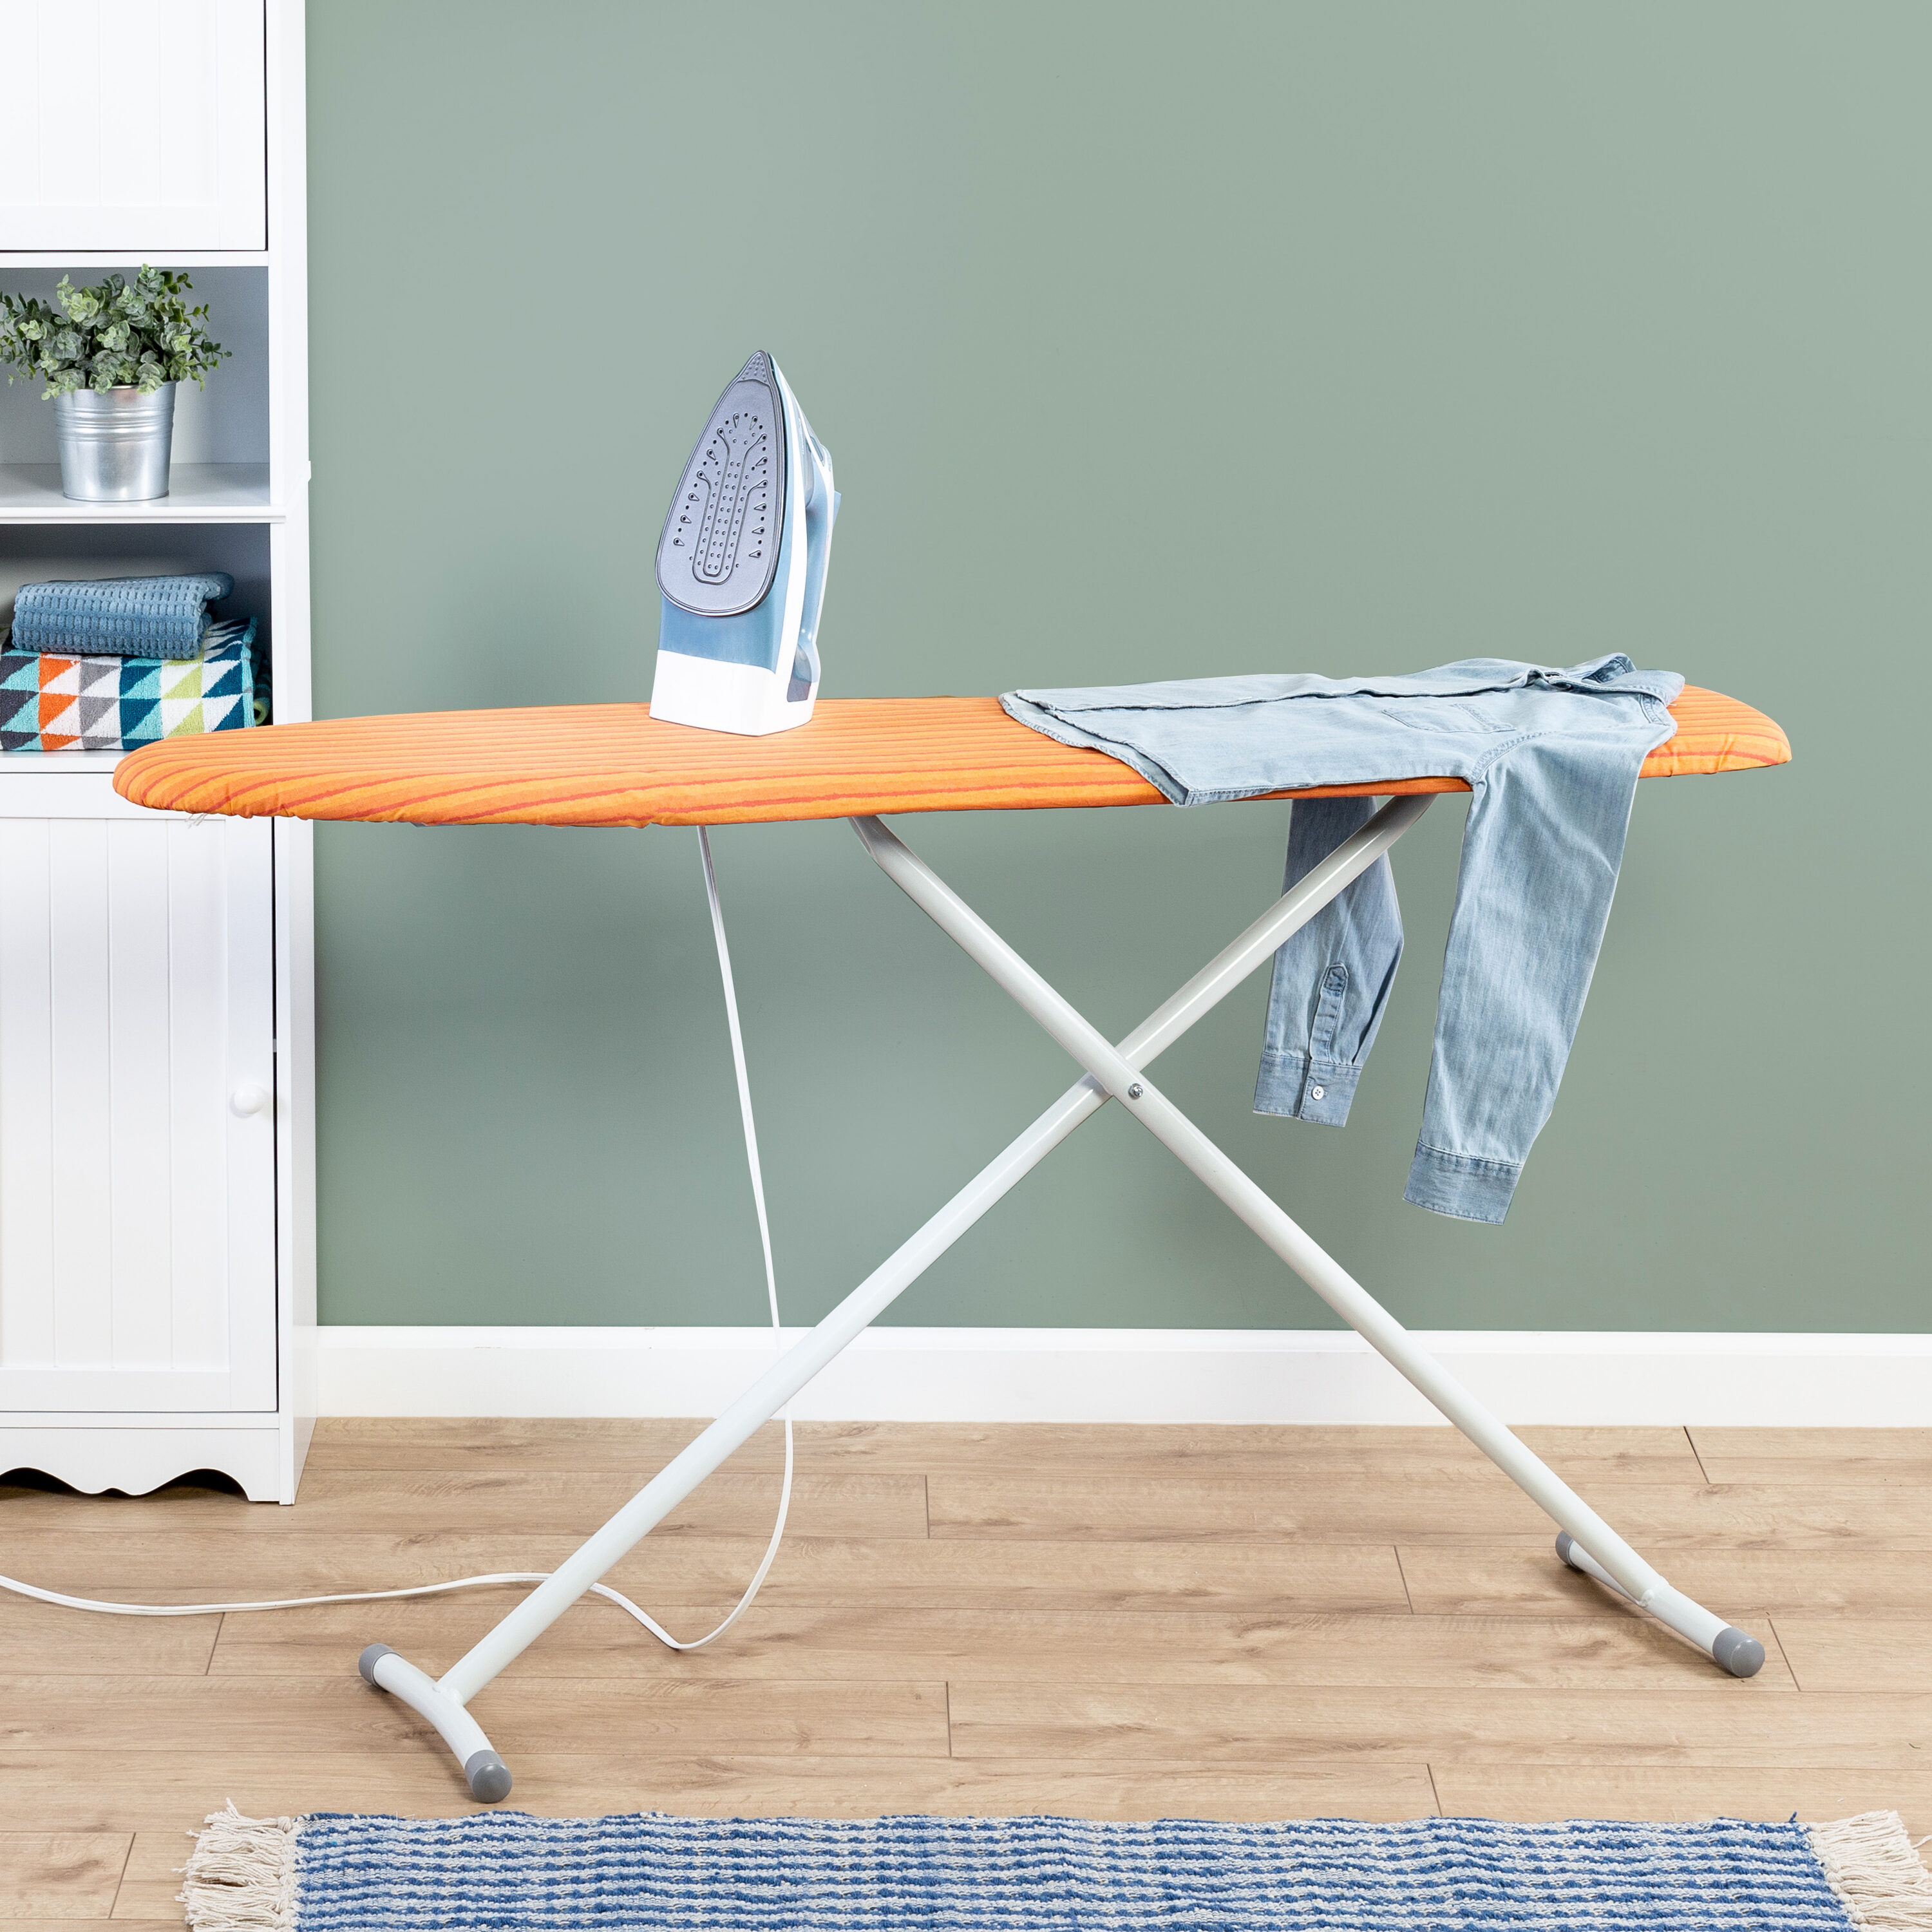 Polder Gray Freestanding Folding Ironing Board (15.2-in x 2.5-in x 58.3-in)  in the Ironing Boards, Covers & Accessories department at